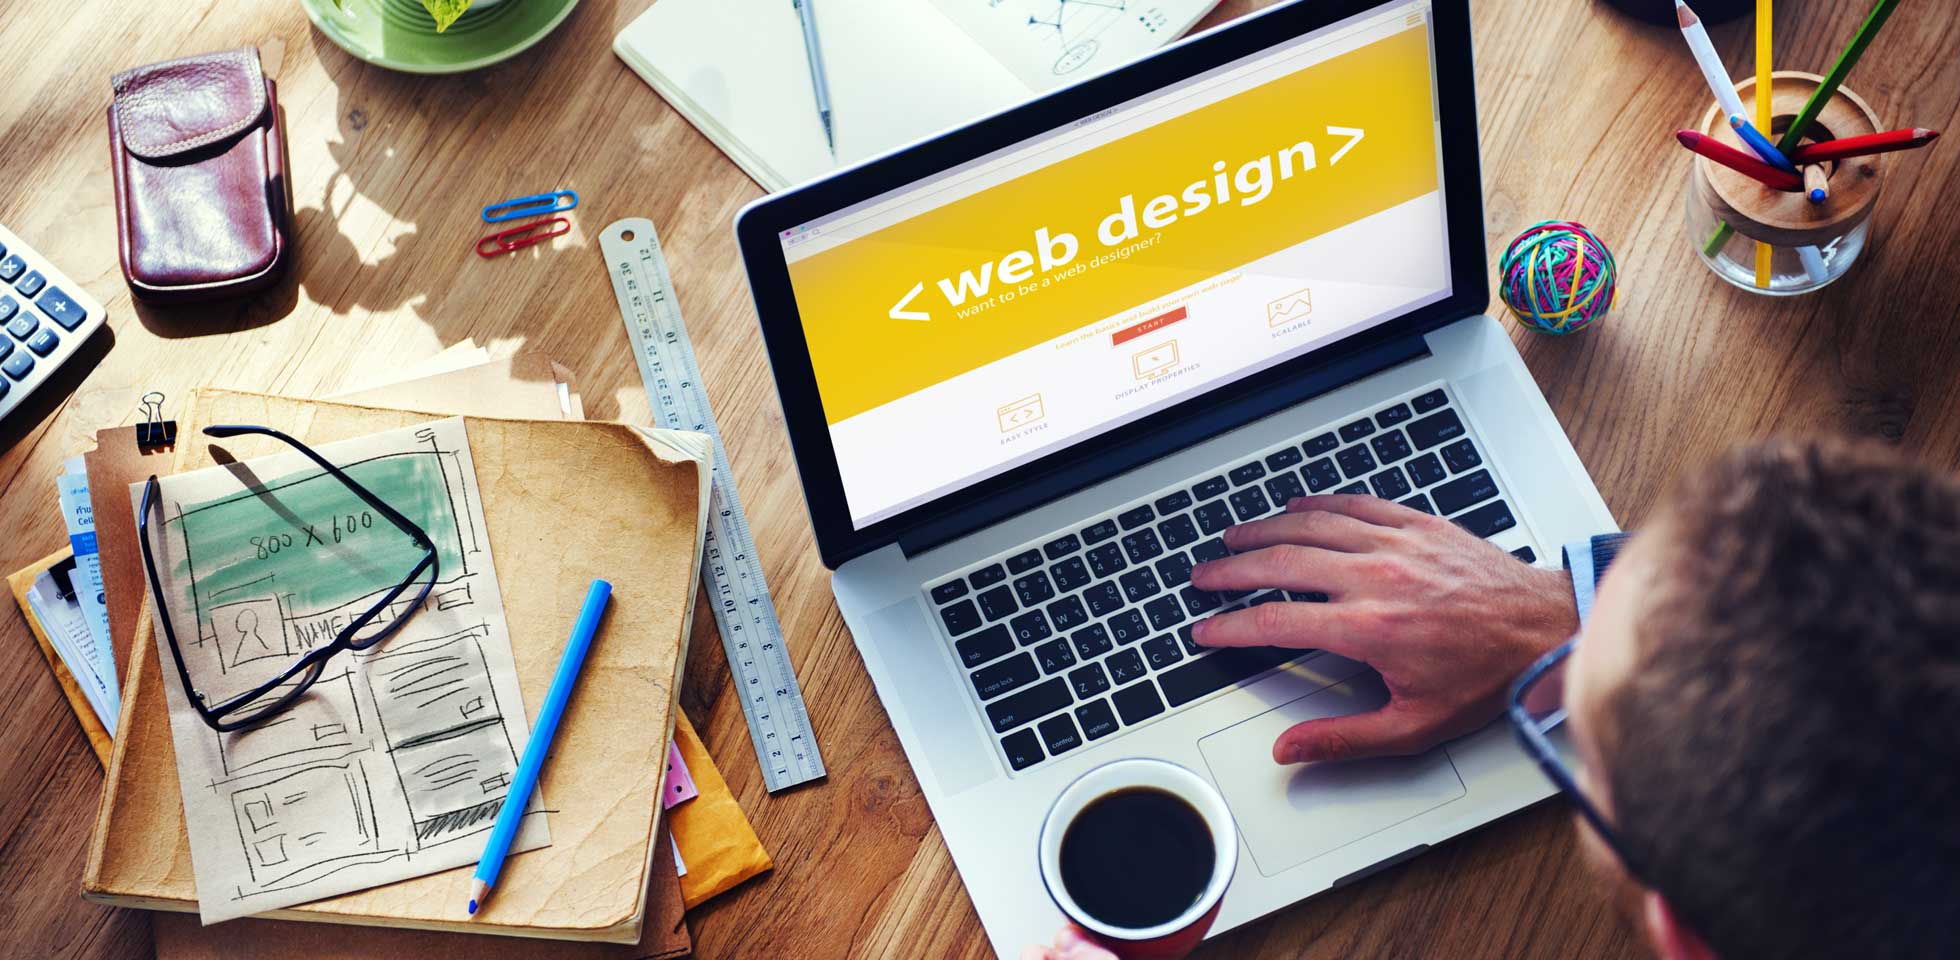 All that is needed to be a great website designer